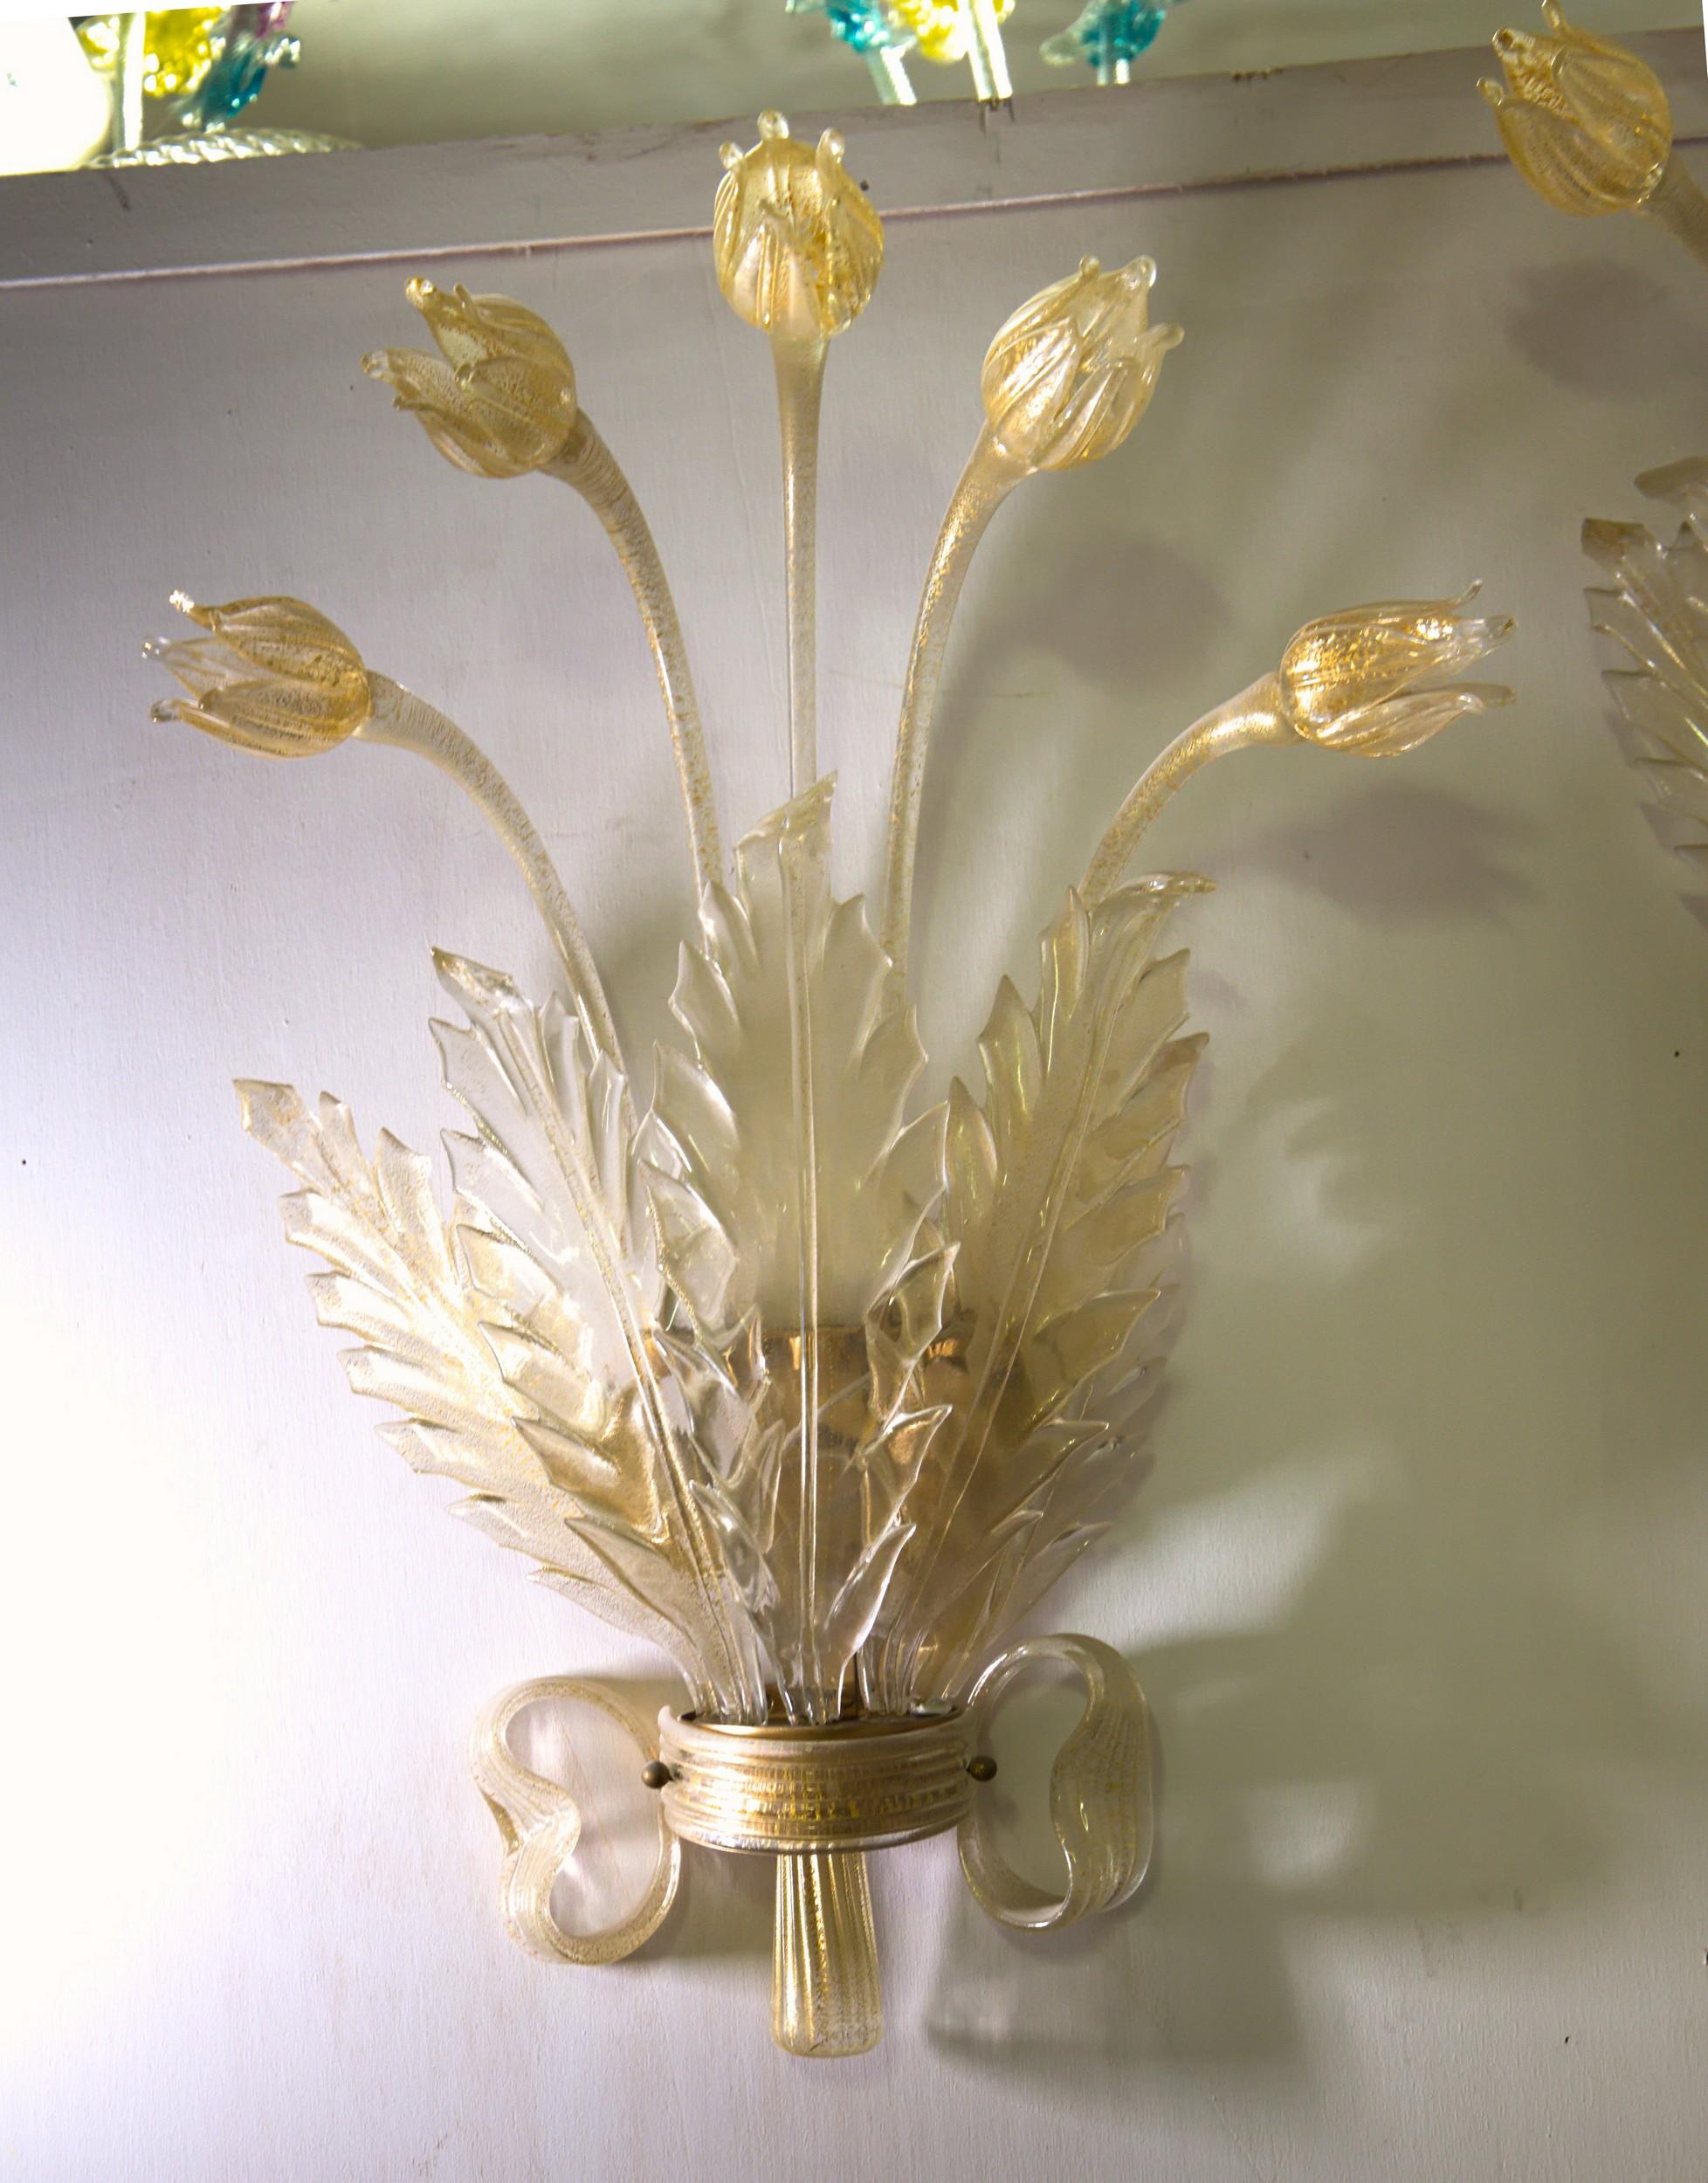 Seguso Pair of Sconces, Murano Glass with Gold Leaf, Tulips, Leaves and Bow Deco For Sale 3